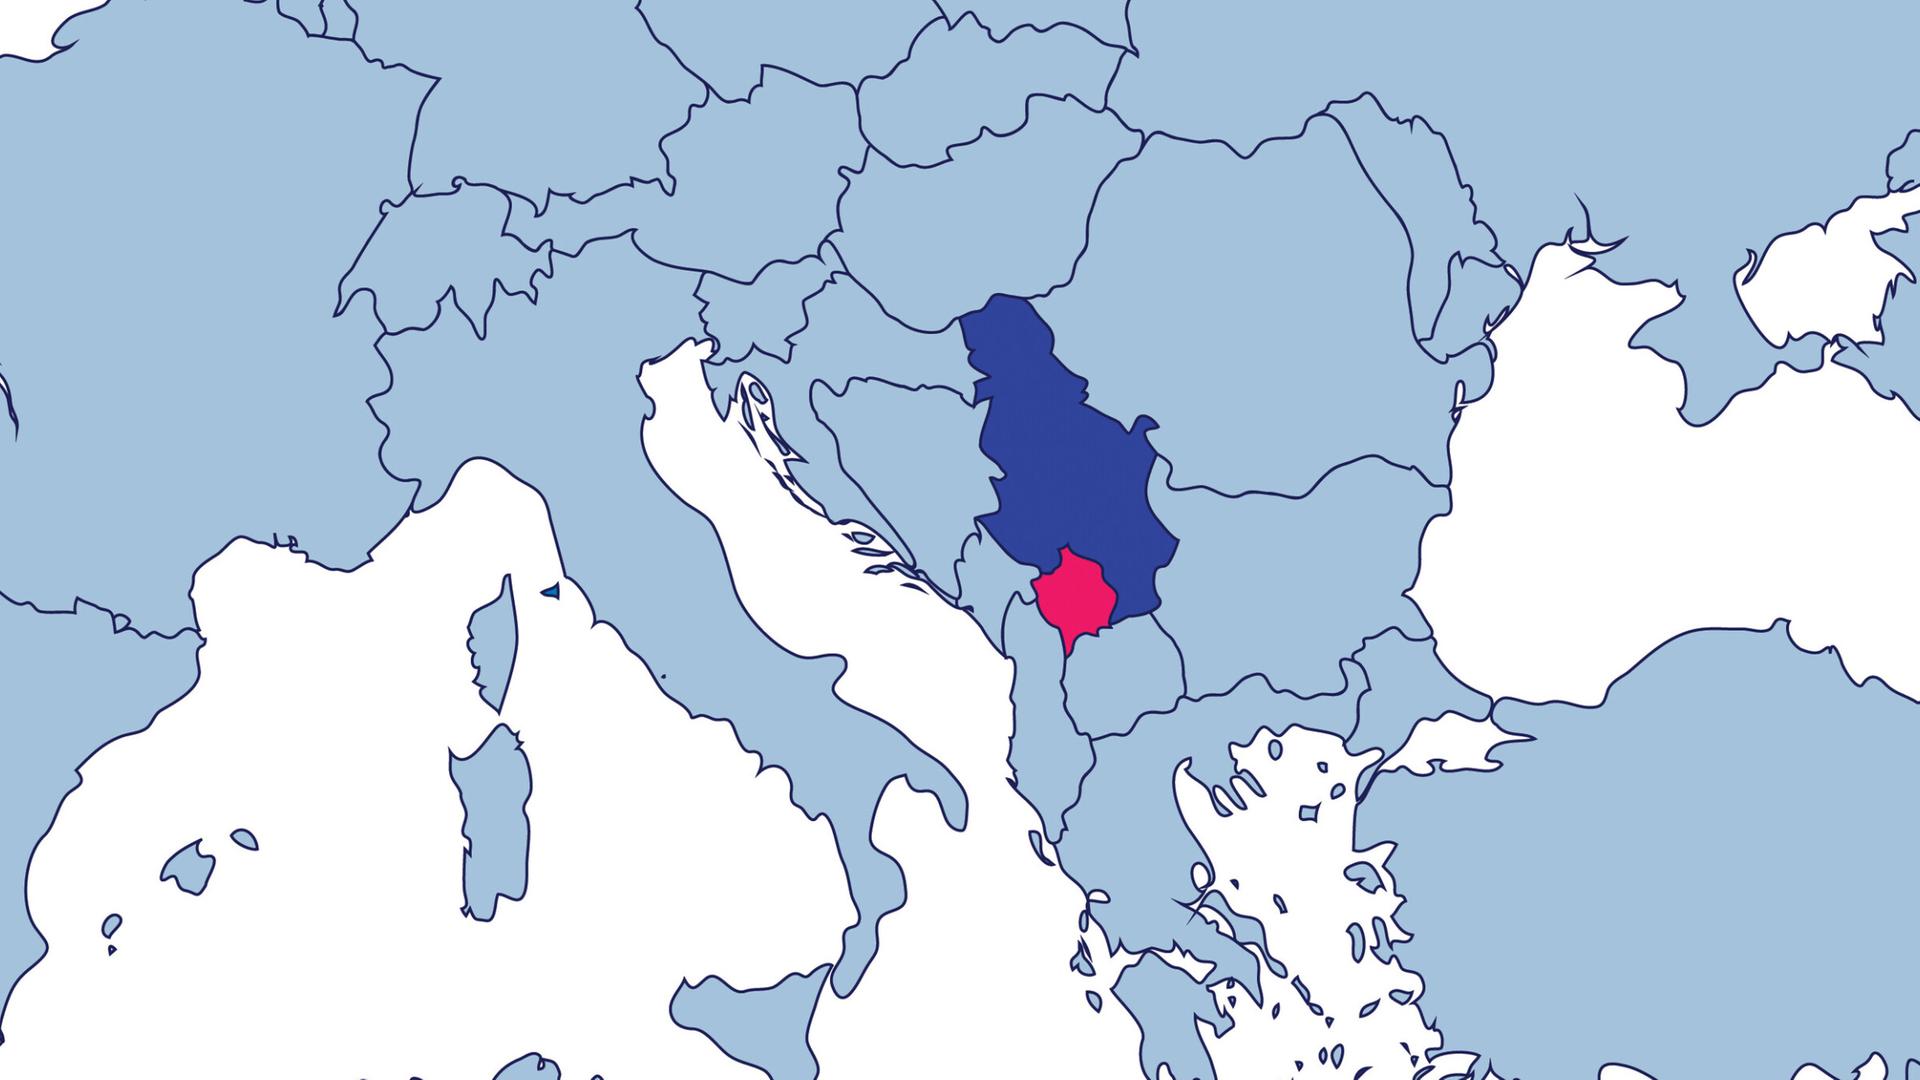 Serbia and Kosovo on Europe map